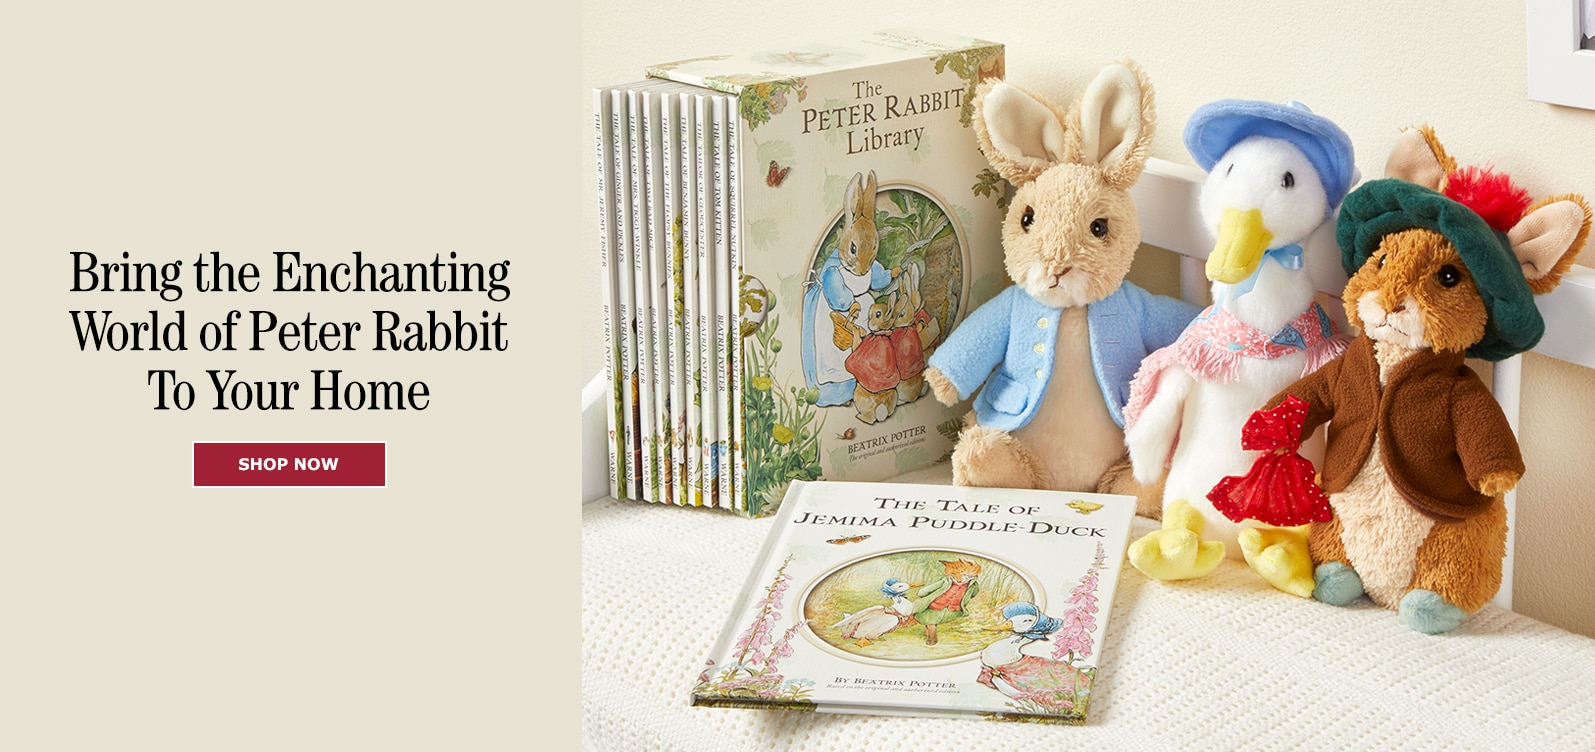 Bring the Enchanting World of Peter Rabbit to Your Home. Shop Now